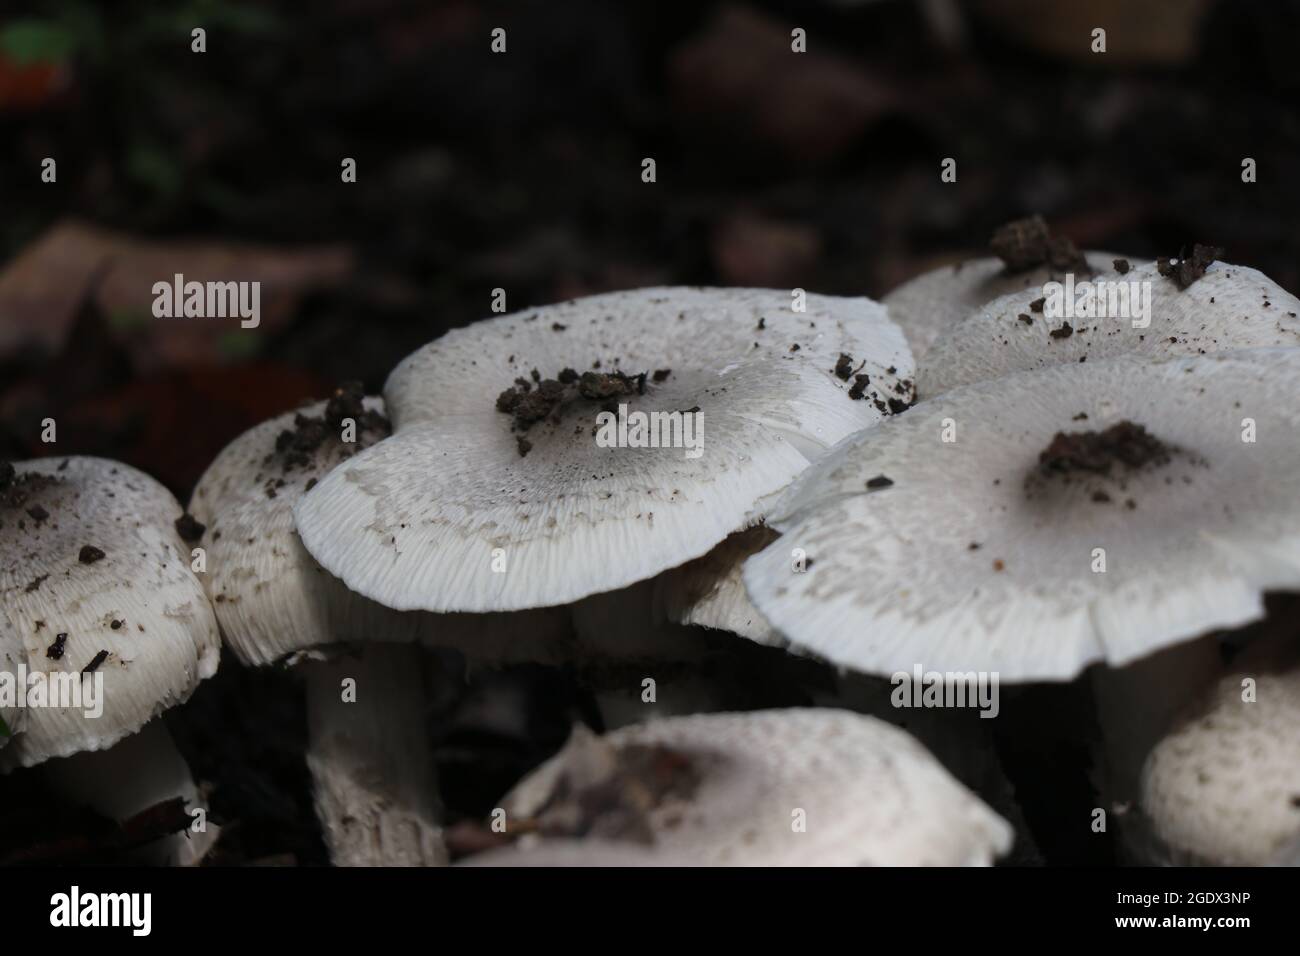 Rare Edible white mushrooms found in india on a group. Natural mushroom growing Stock Photo